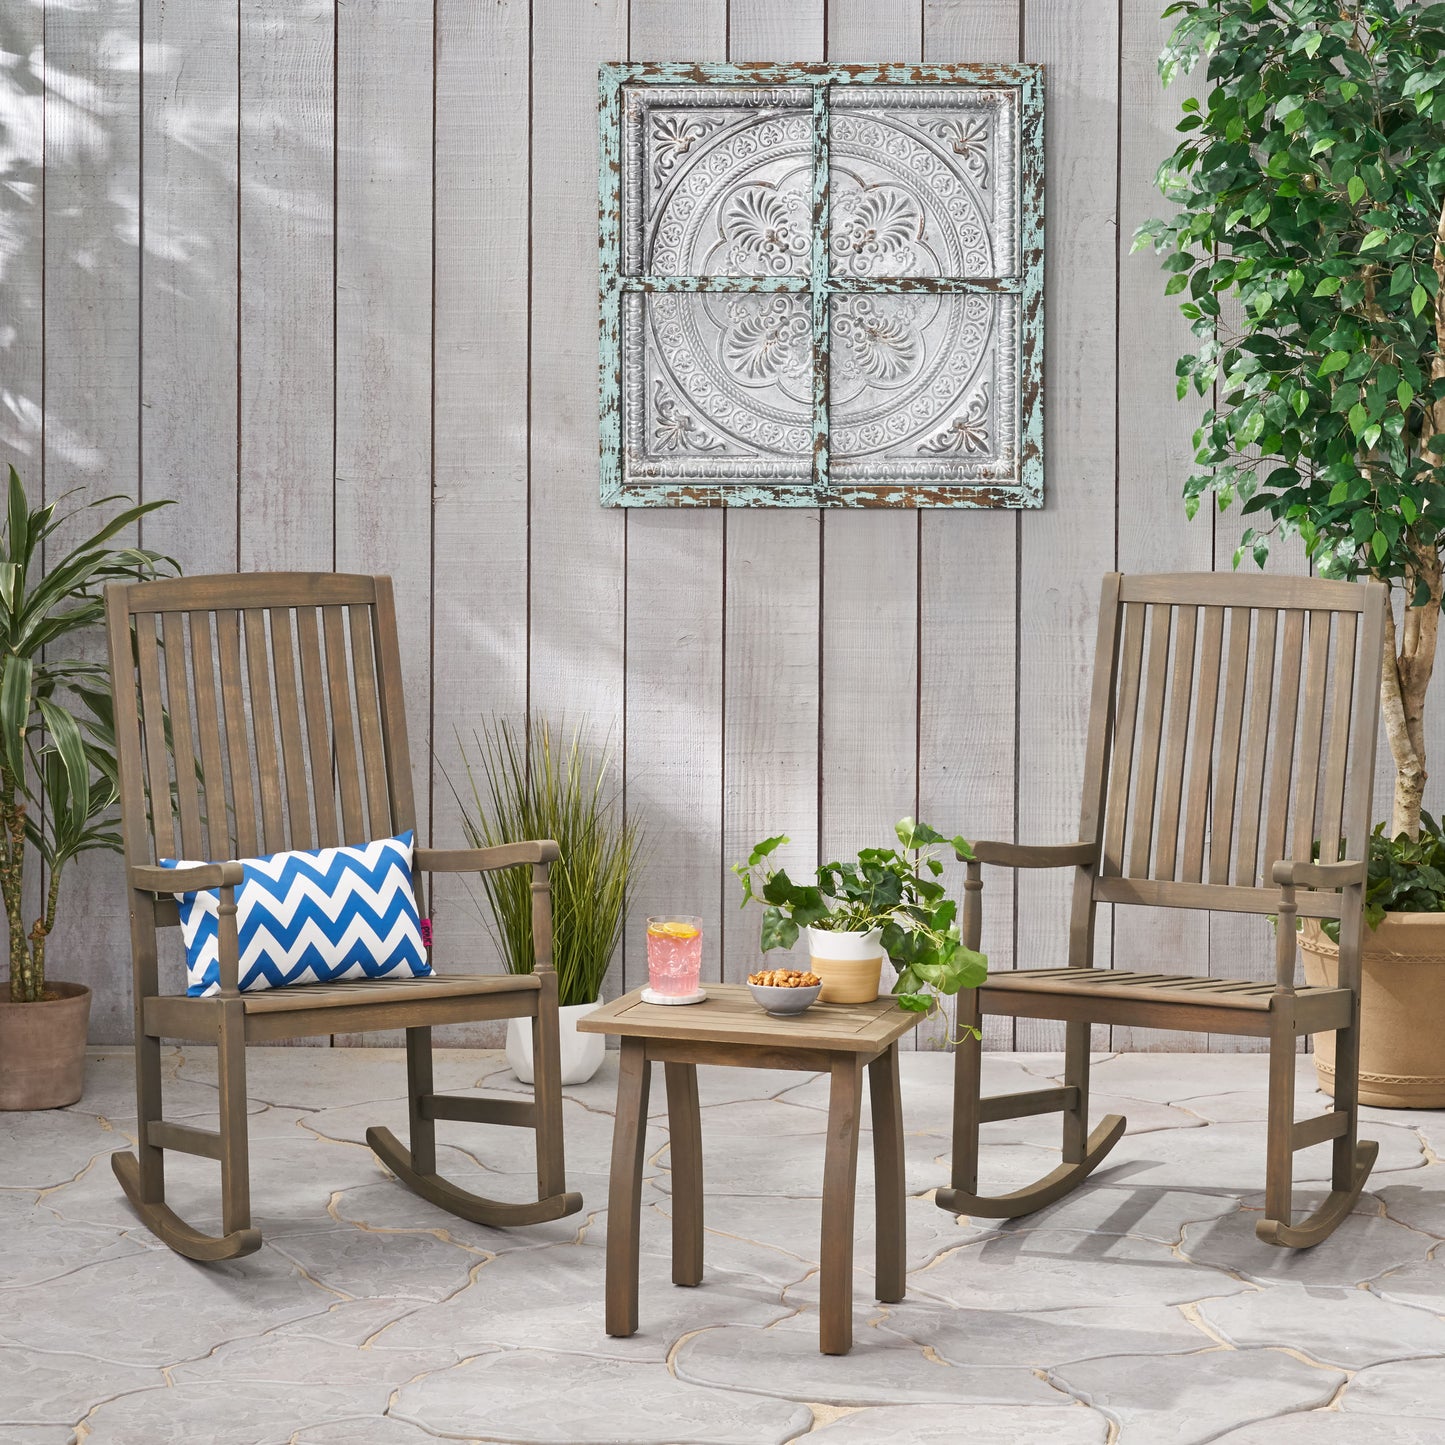 Verna Outdoor 2 Seater Acacia Wood Rocking Chairs and Side Table Set